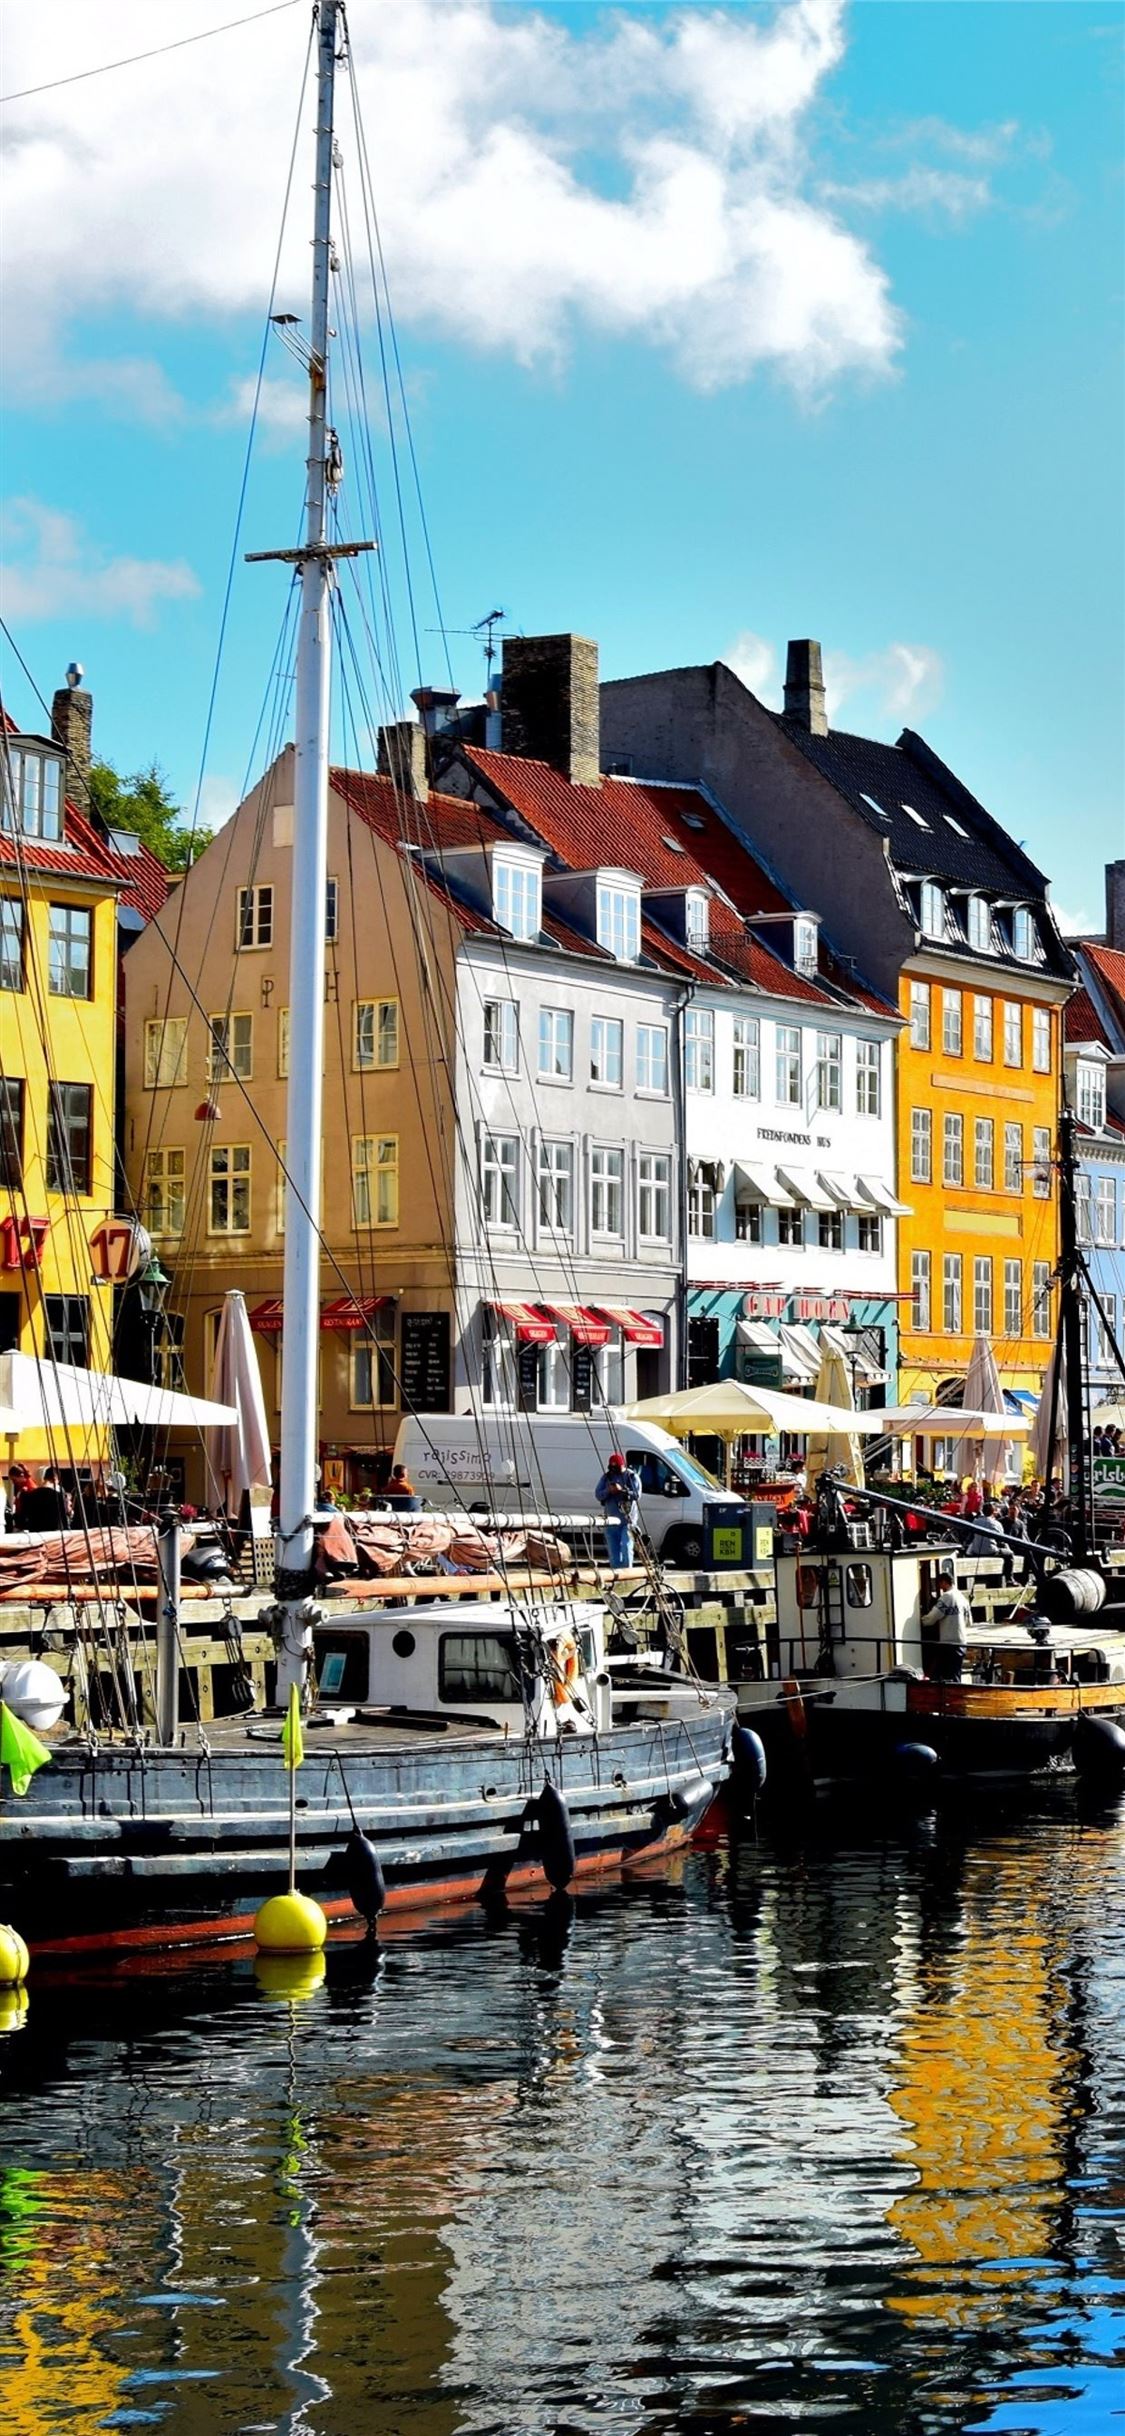 Copenhagen travel guide: everything you need to know